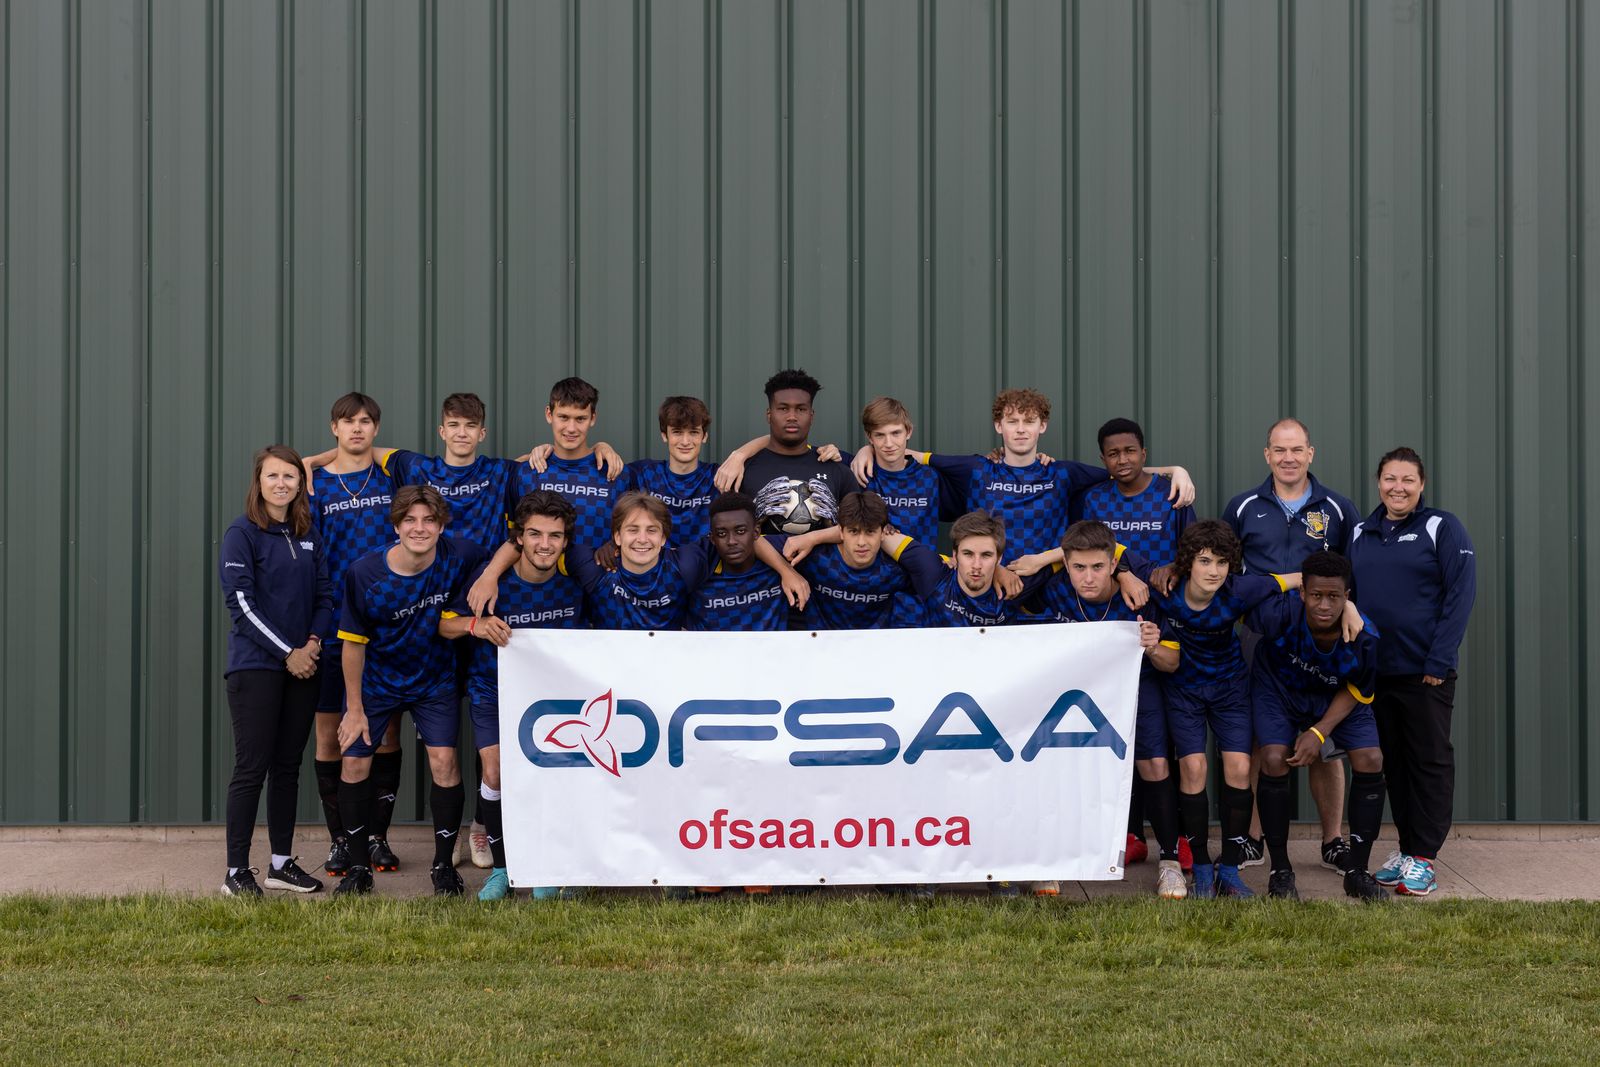 Le Sommet s’incline à OFSAA